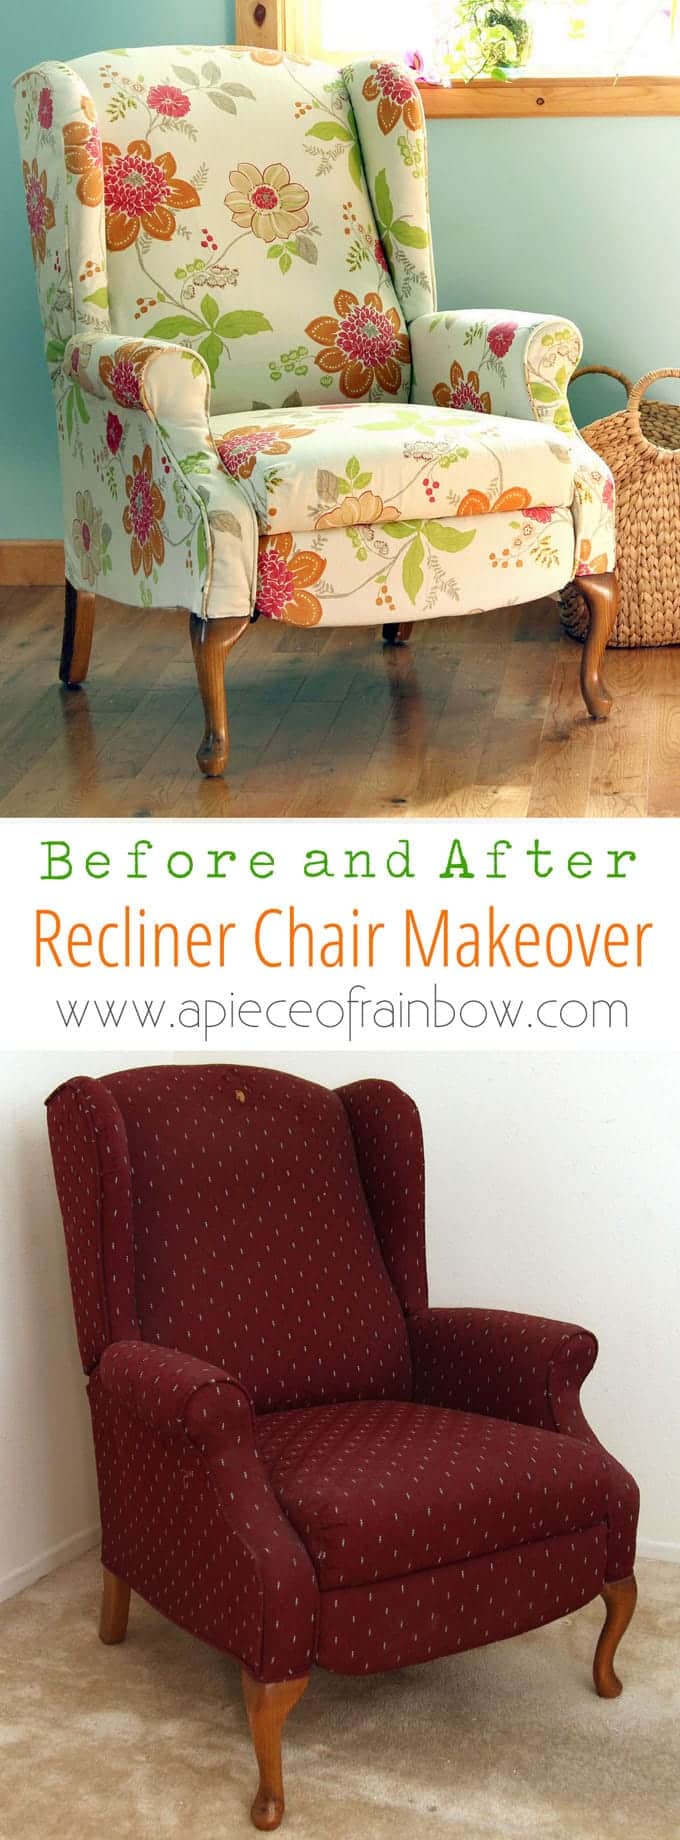 Dramatic before after transformation and detailed tutorial on how to makeover an upholstered recliner chair, and lots of helpful tips for beginners. A Piece Of Rainbow